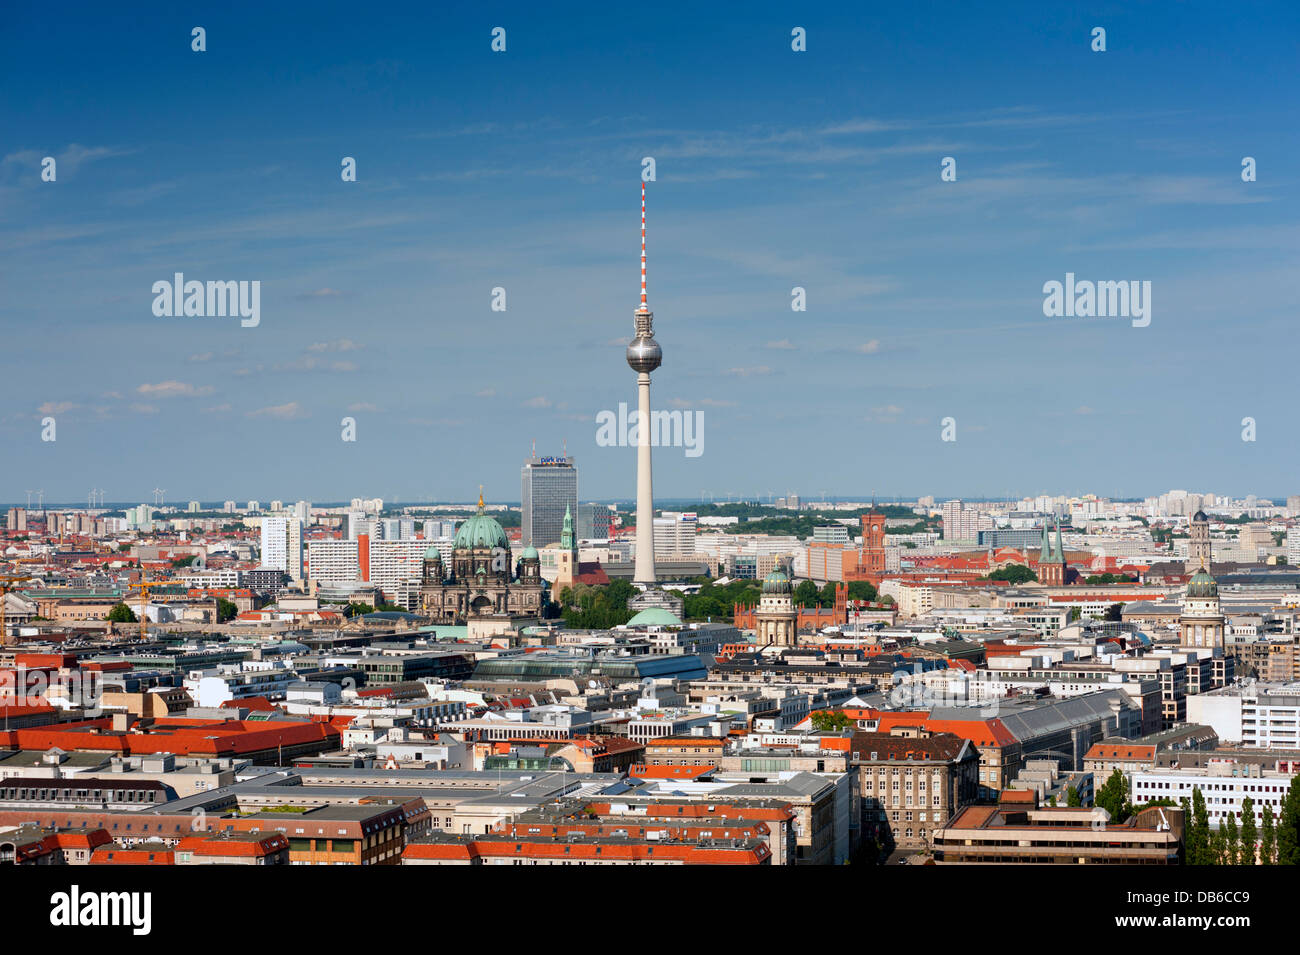 Skyline with Television Tower of Fernsehturm in Berlin Germany Stock Photo